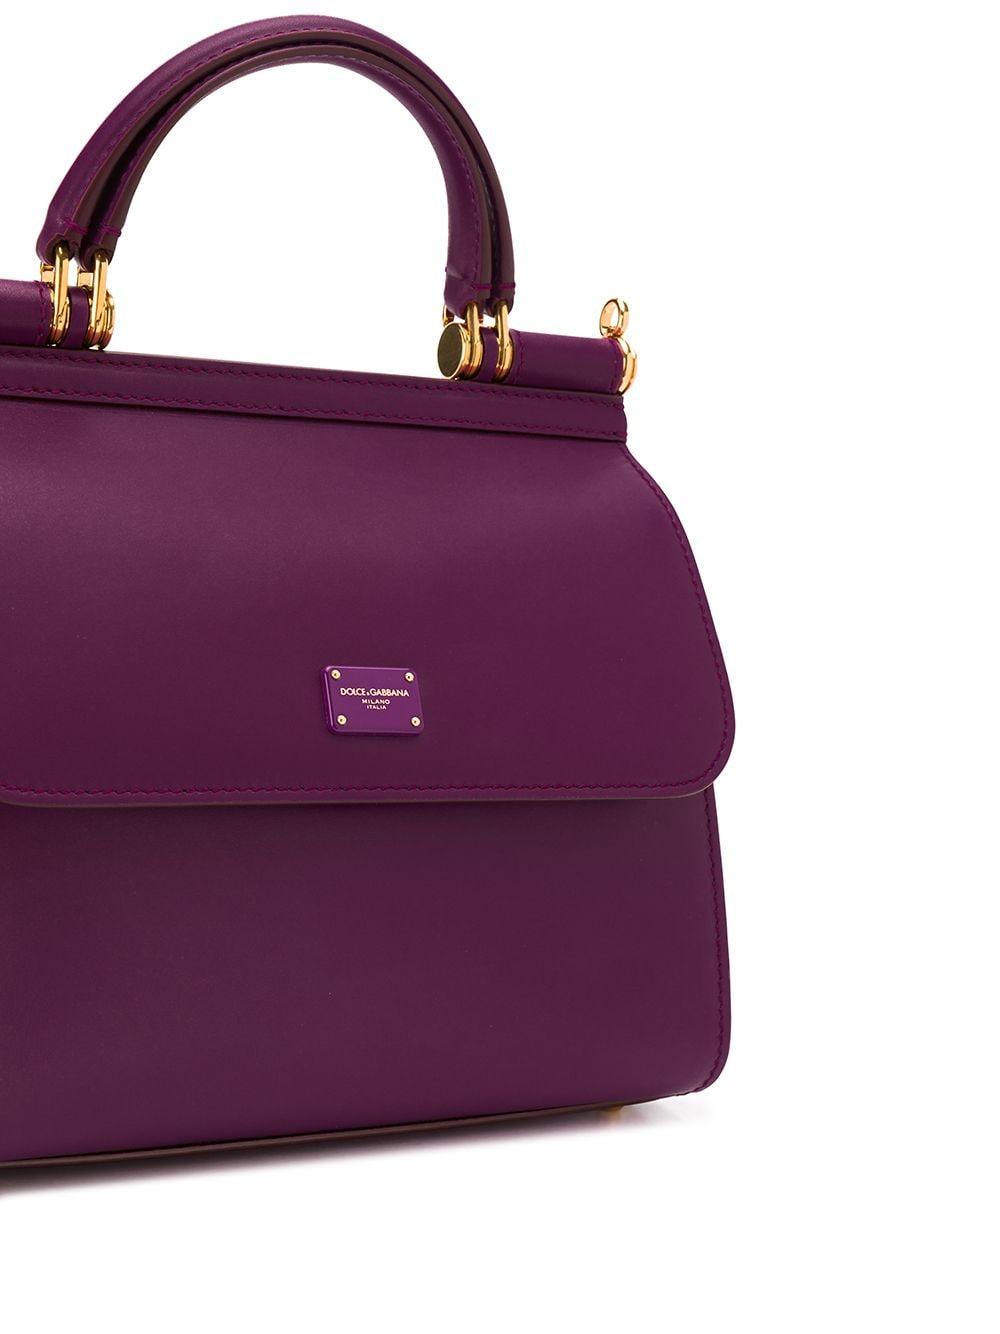 Dolce & Gabbana Leather Small Sicily 58 Tote in Purple - Lyst